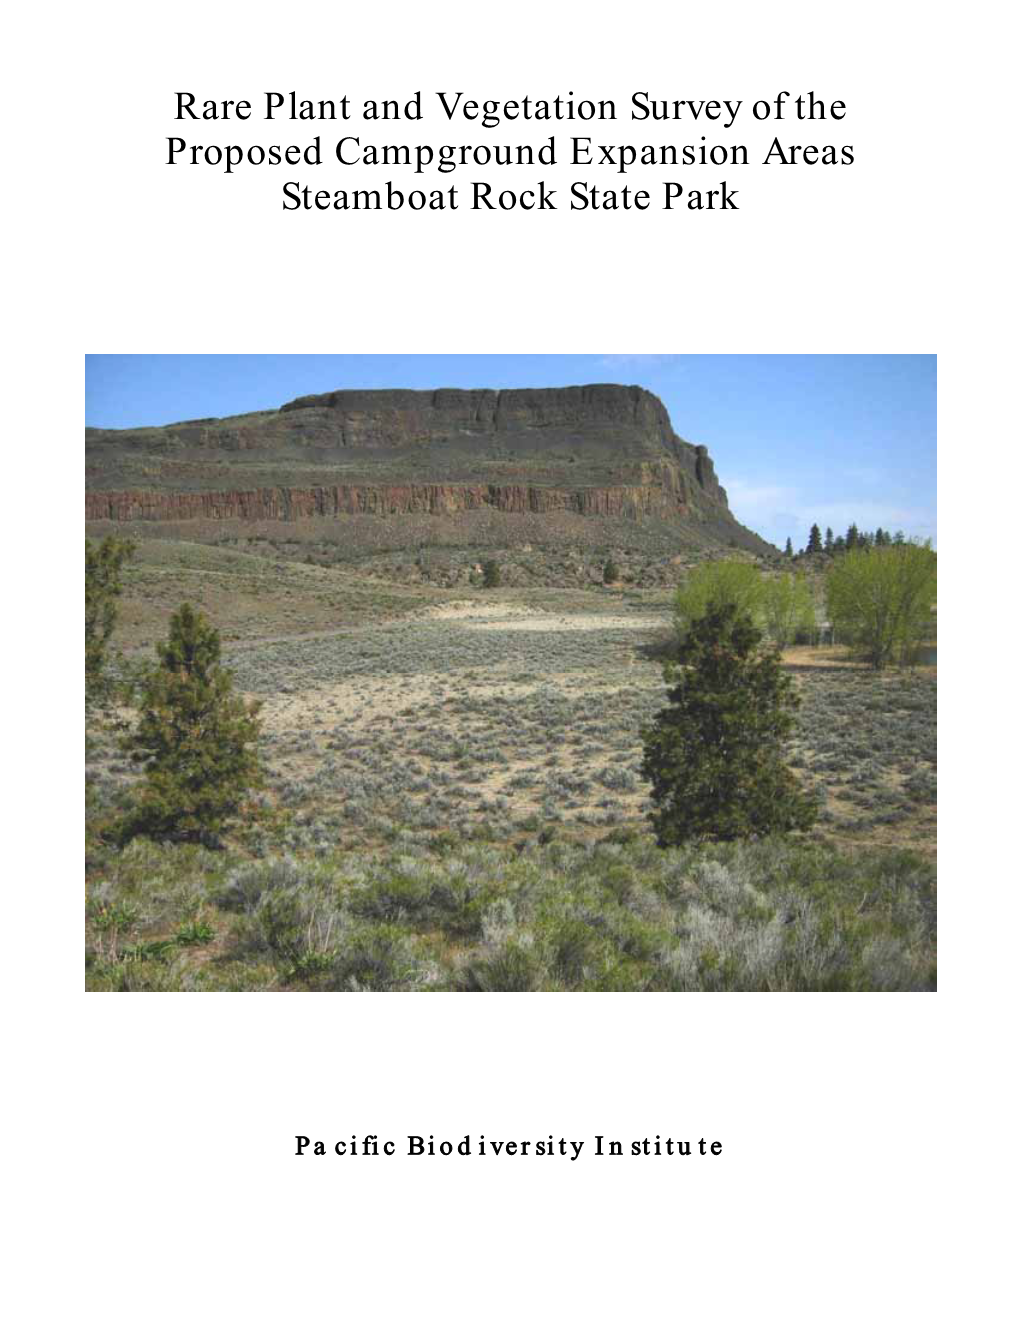 Rare Plant and Vegetation Survey of the Proposed Campground Expansion Areas Steamboat Rock State Park